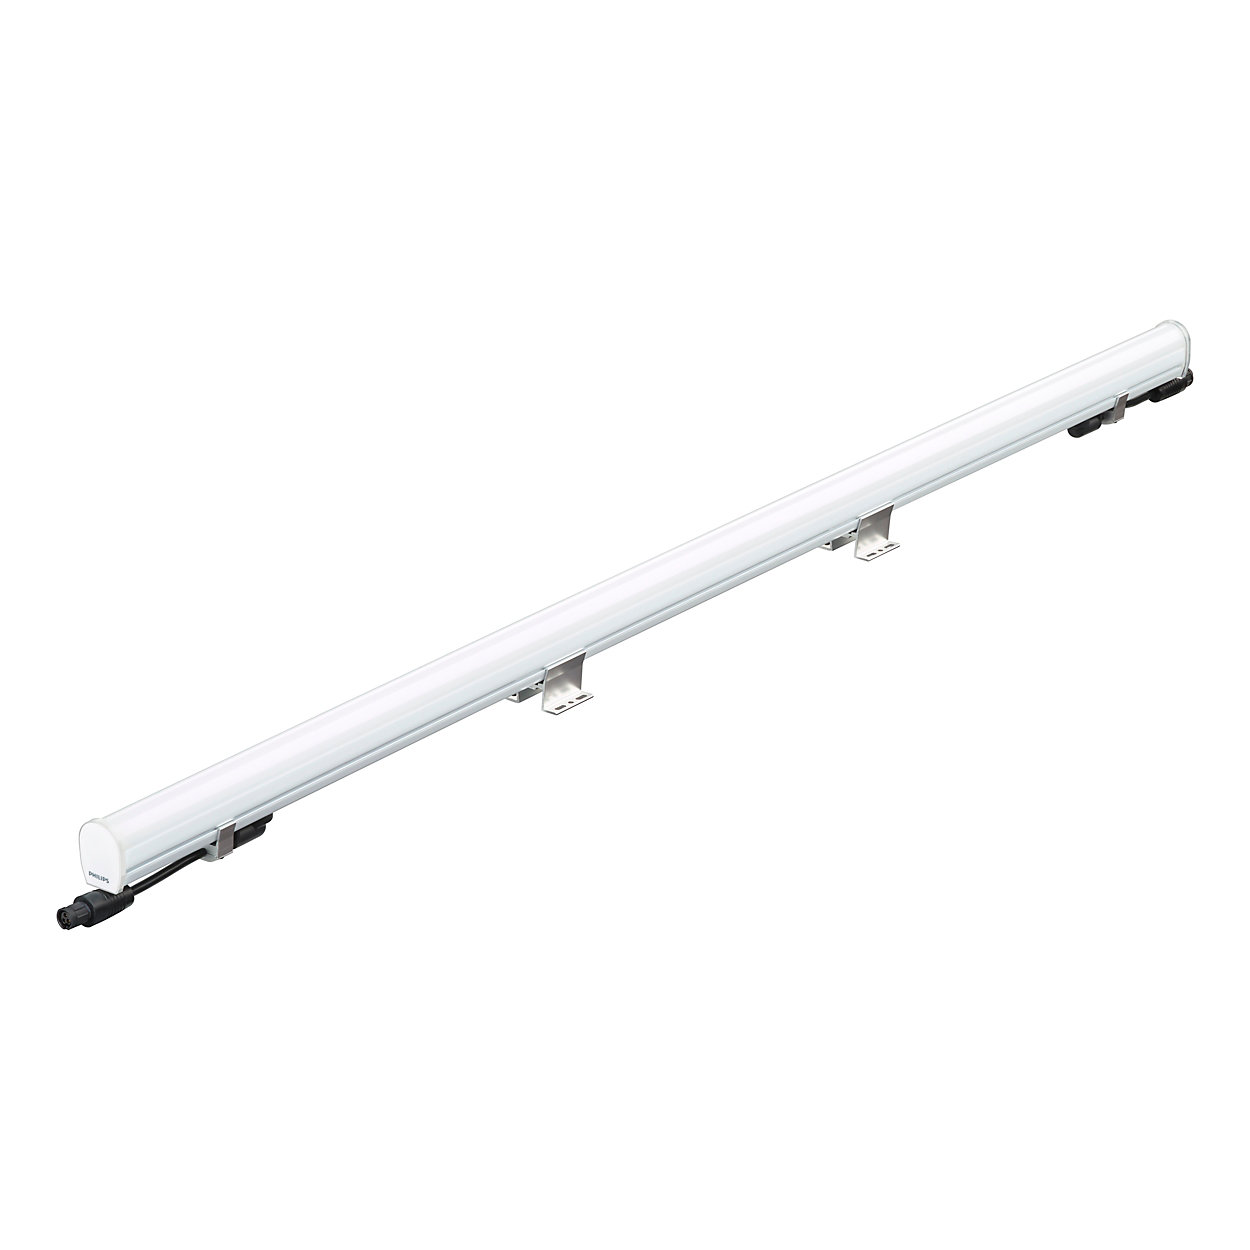 Vaya Tube – A reliable and cost-effective LED lighting fixture designed for dynamic color-changing or mono-color lighting effects